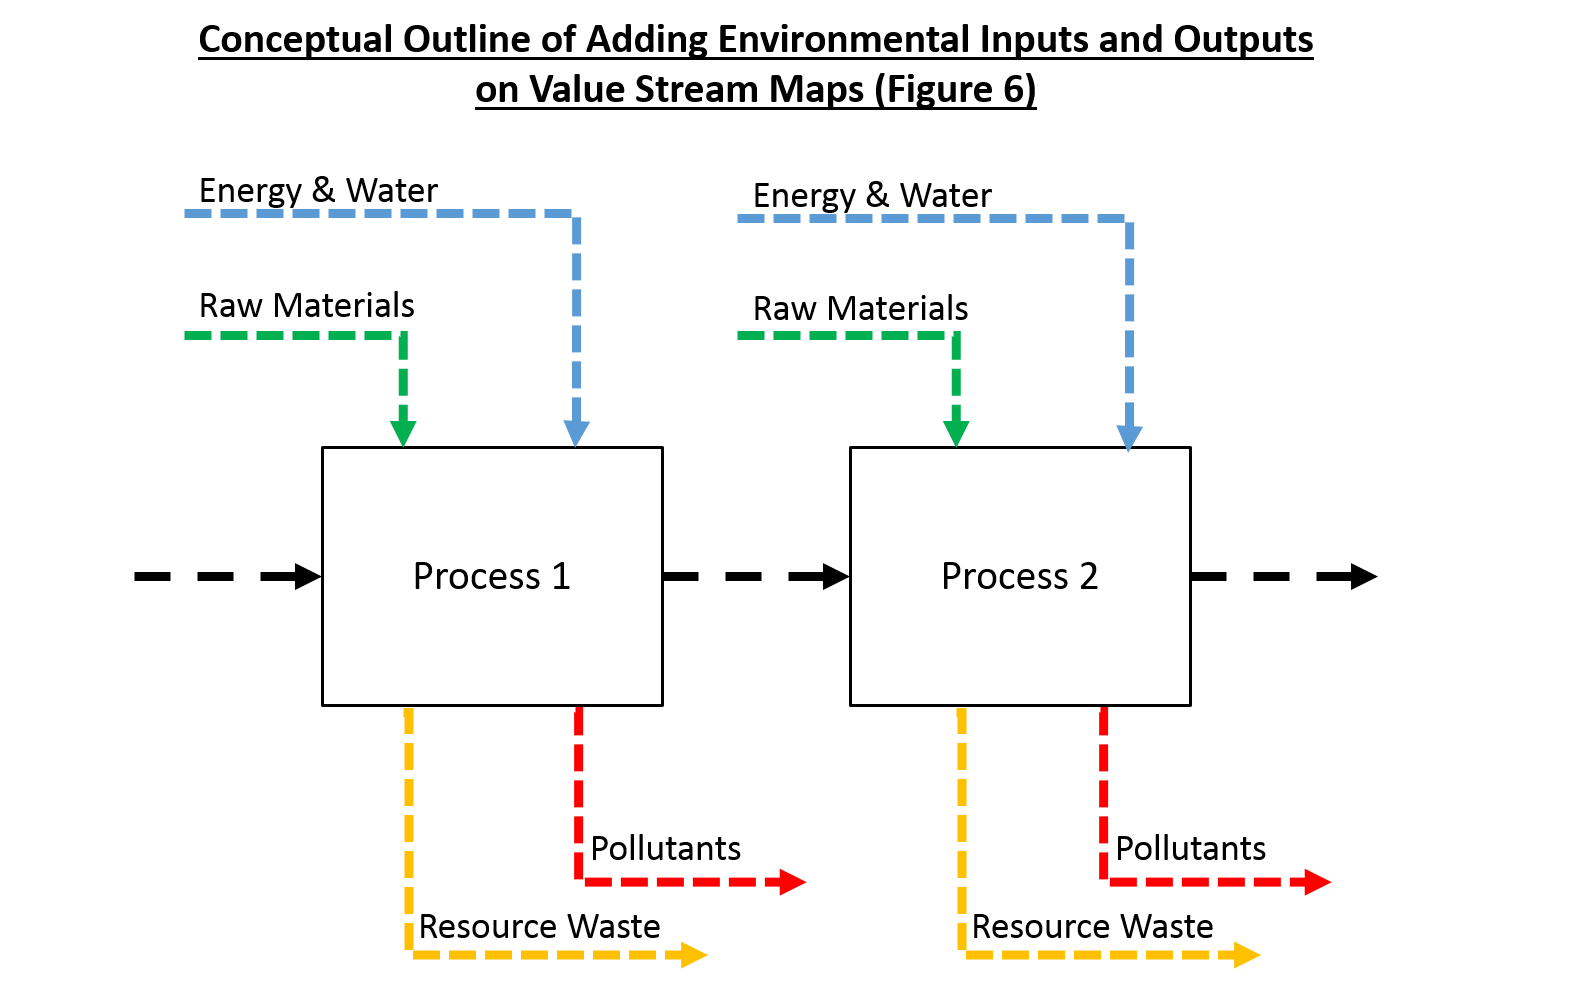 Conceptual Outline of Adding Environmental Inputs and Outputs on Value Stream Maps (Figure 6)